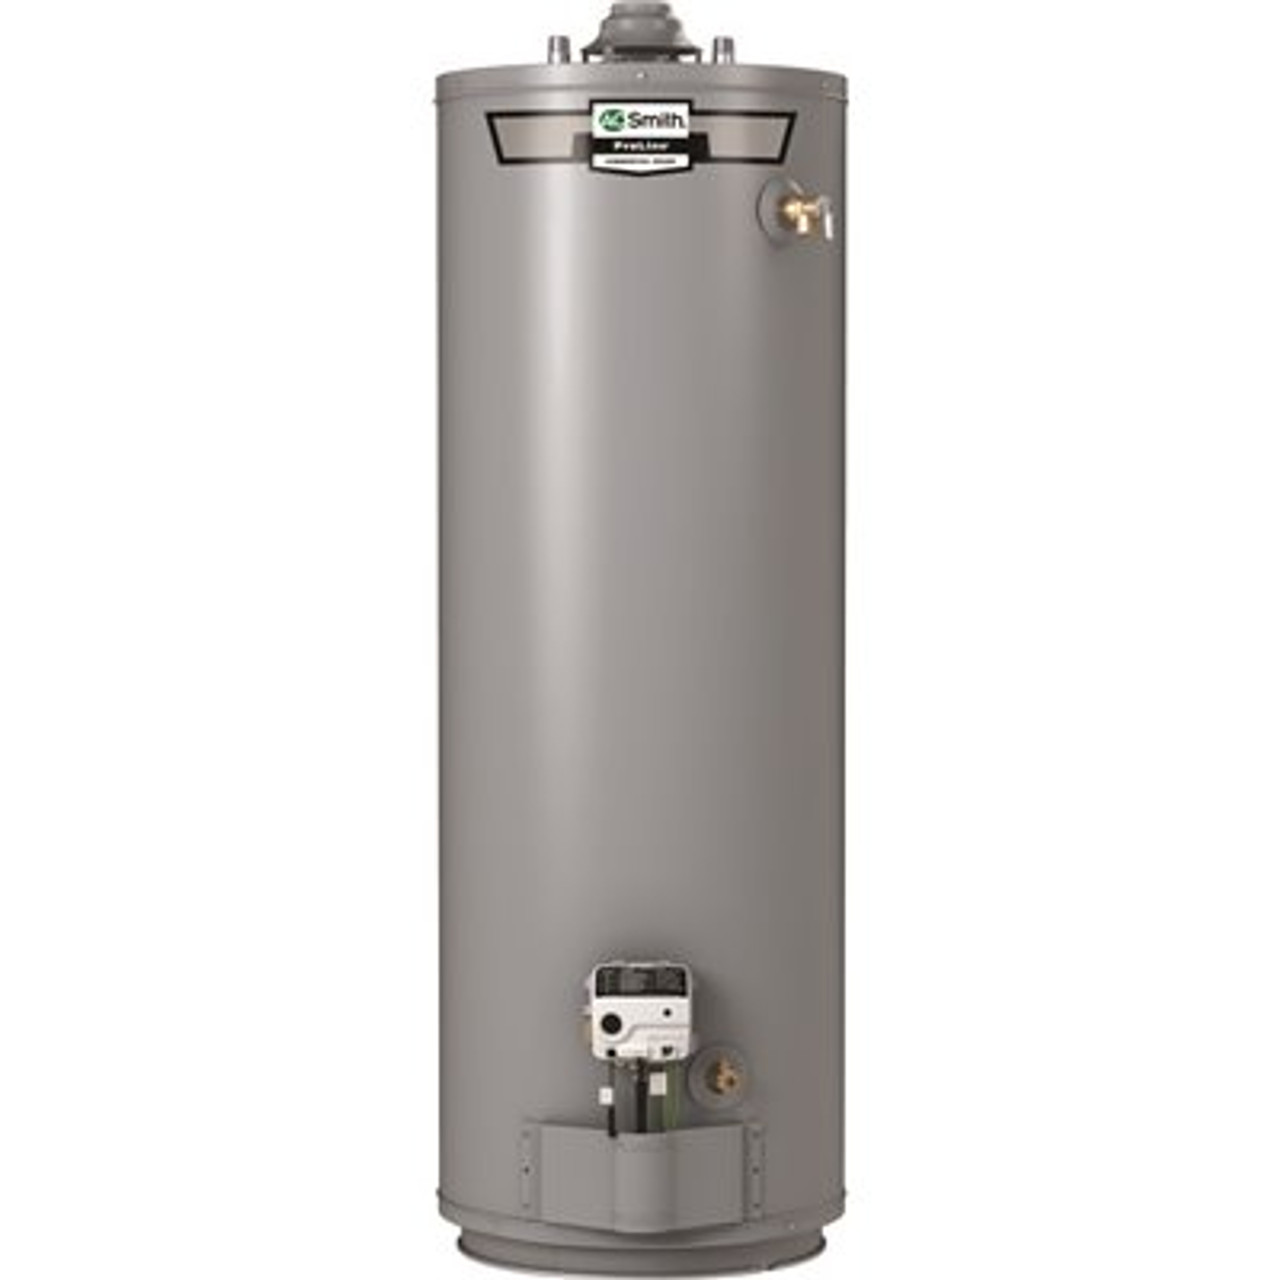 A. O. SMITH 50-Gallon Tall Ultra-Low-nox Gas Water Heater 20 X 60-7/8